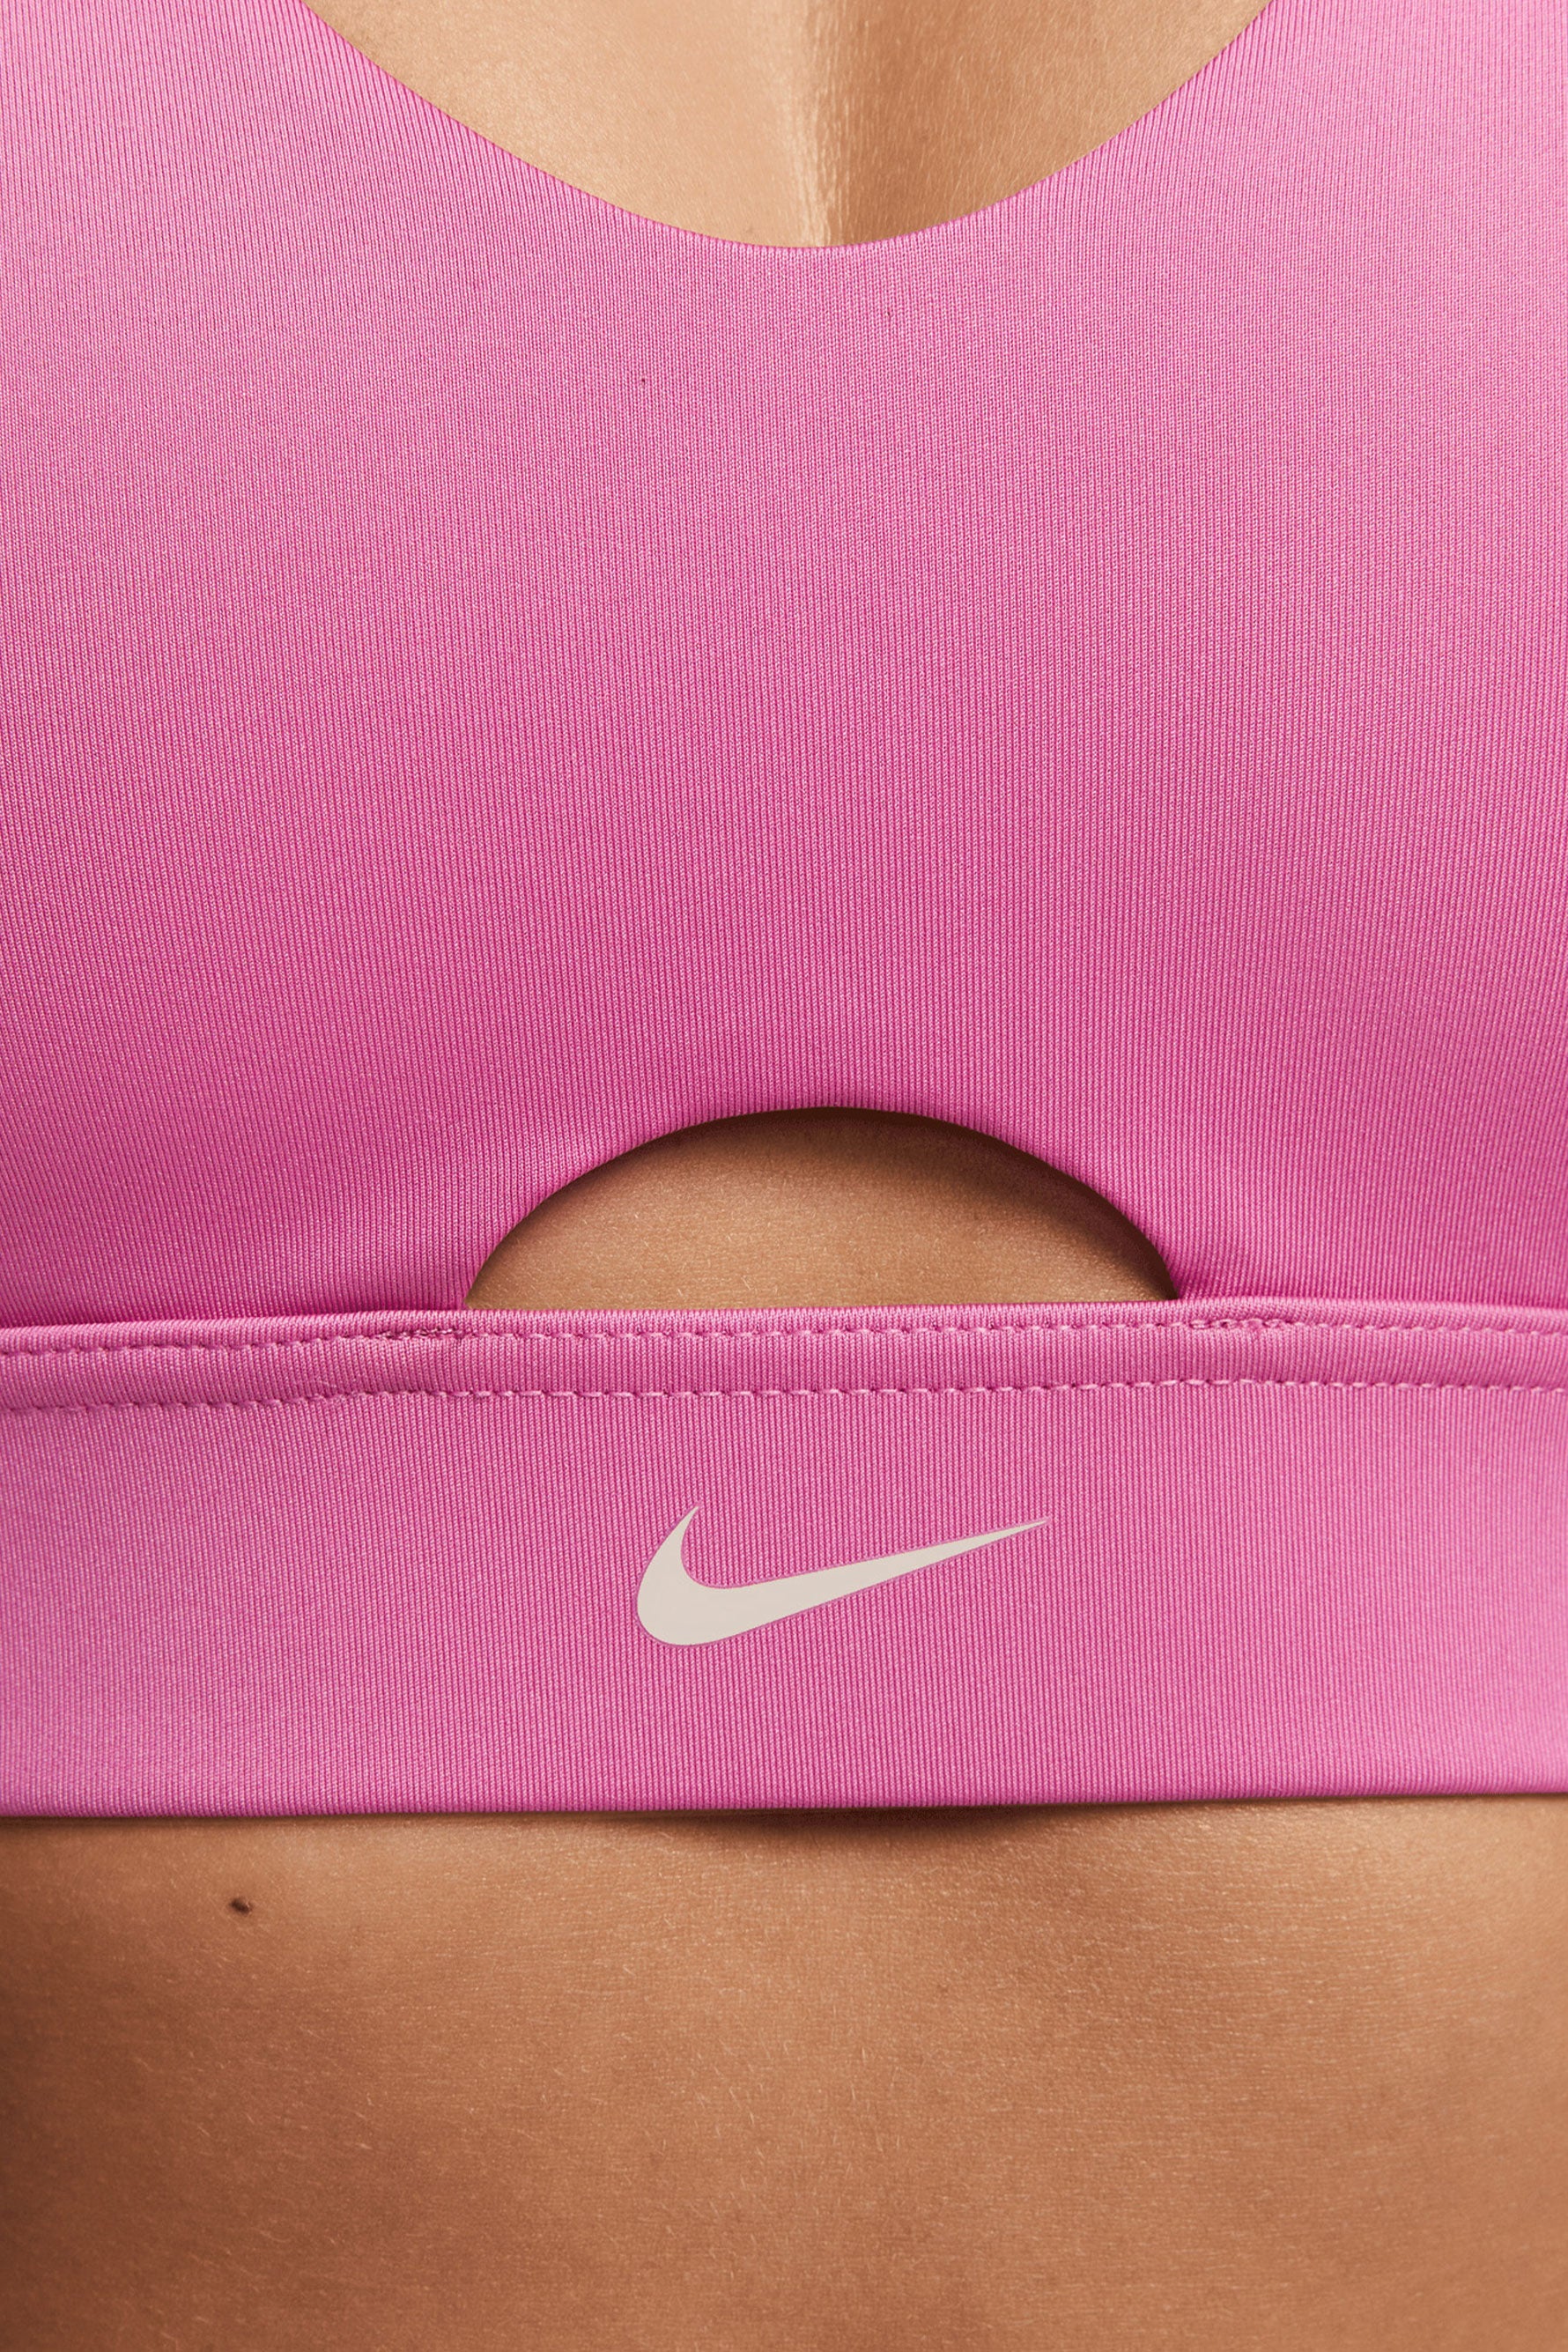  Nike Indy Plunge Cutout Bra : Clothing, Shoes & Jewelry